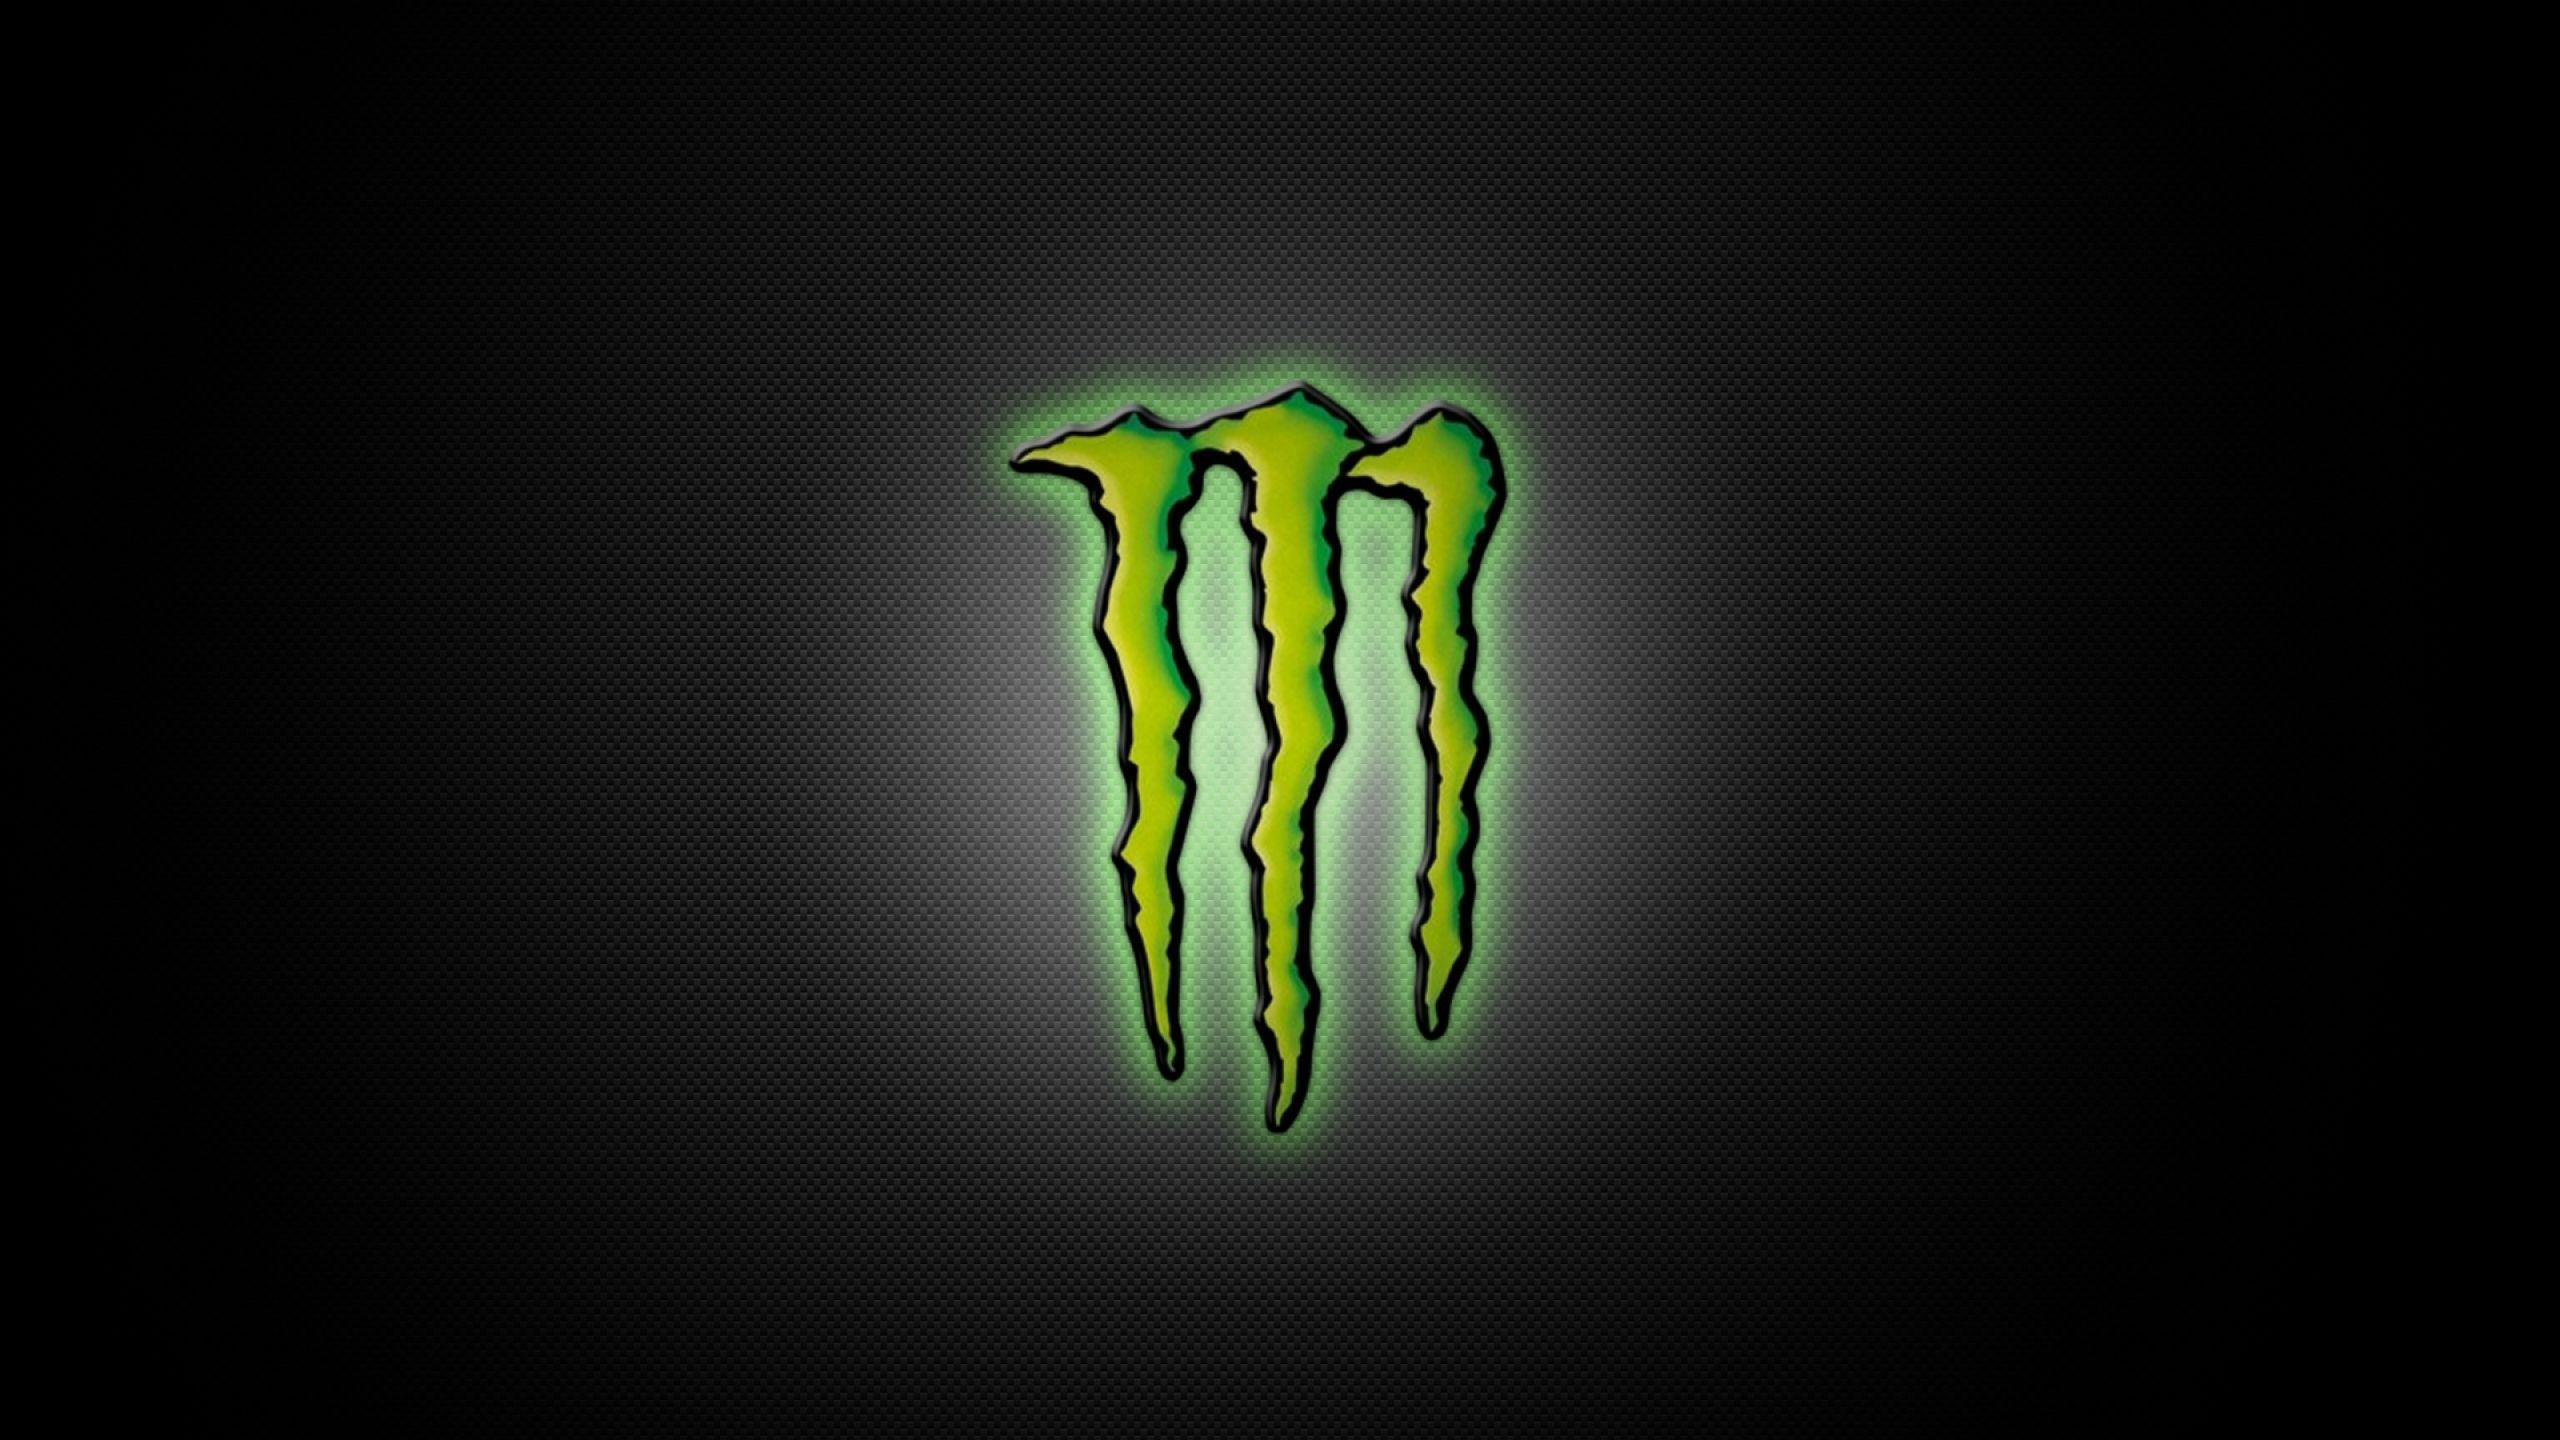 Cool Fox and Monster Logo - Monster Energy Wallpapers, Pictures, Images